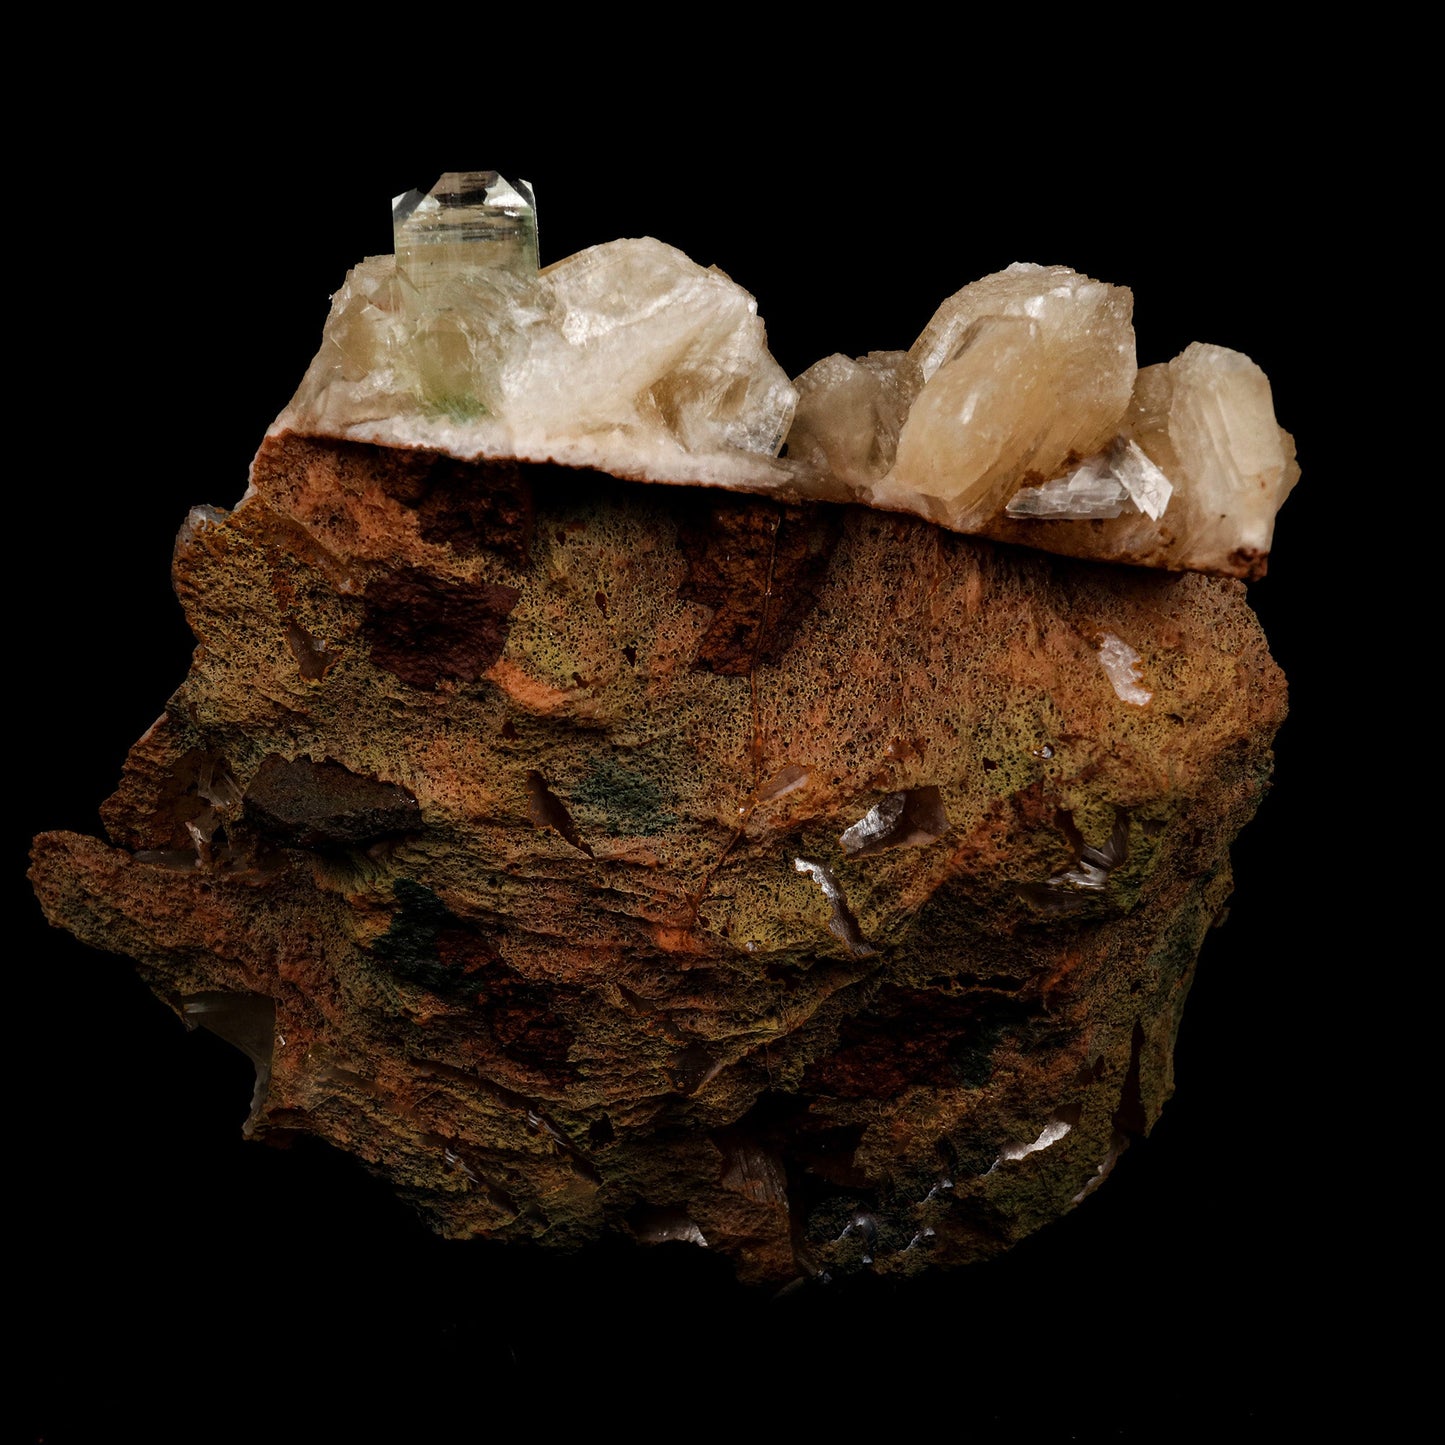 Stilbite with Scolecite Spray, Green Apophyllite Natural Mineral Speci…  https://www.superbminerals.us/products/stilbite-with-scolecite-spray-green-apophyllite-natural-mineral-specimen-b-5245  Features: Featuring numerous large, lustrous green modified cubes on a dark-brown matrix containing numerous acicular sprays of white or colorless Scolecite crystals. Primary Mineral(s): StilbiteSecondary Mineral(s): Apophyllite, ScoleciteMatrix: N/A 5 Inch x 4.5 InchWeight : 384 GmsLocality: Jalgaon